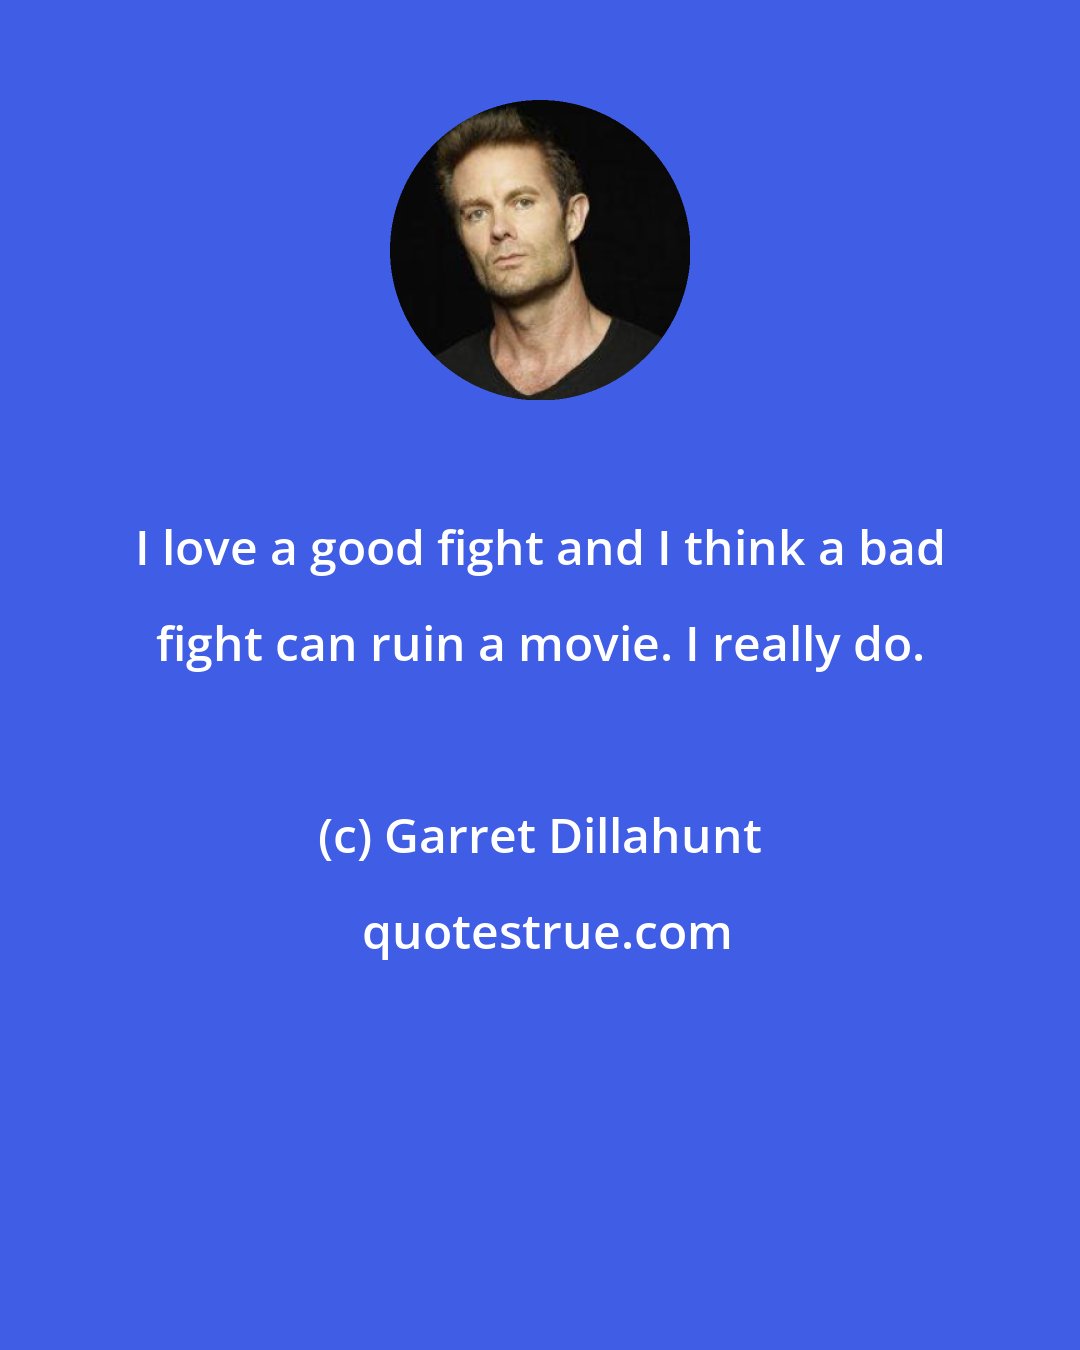 Garret Dillahunt: I love a good fight and I think a bad fight can ruin a movie. I really do.